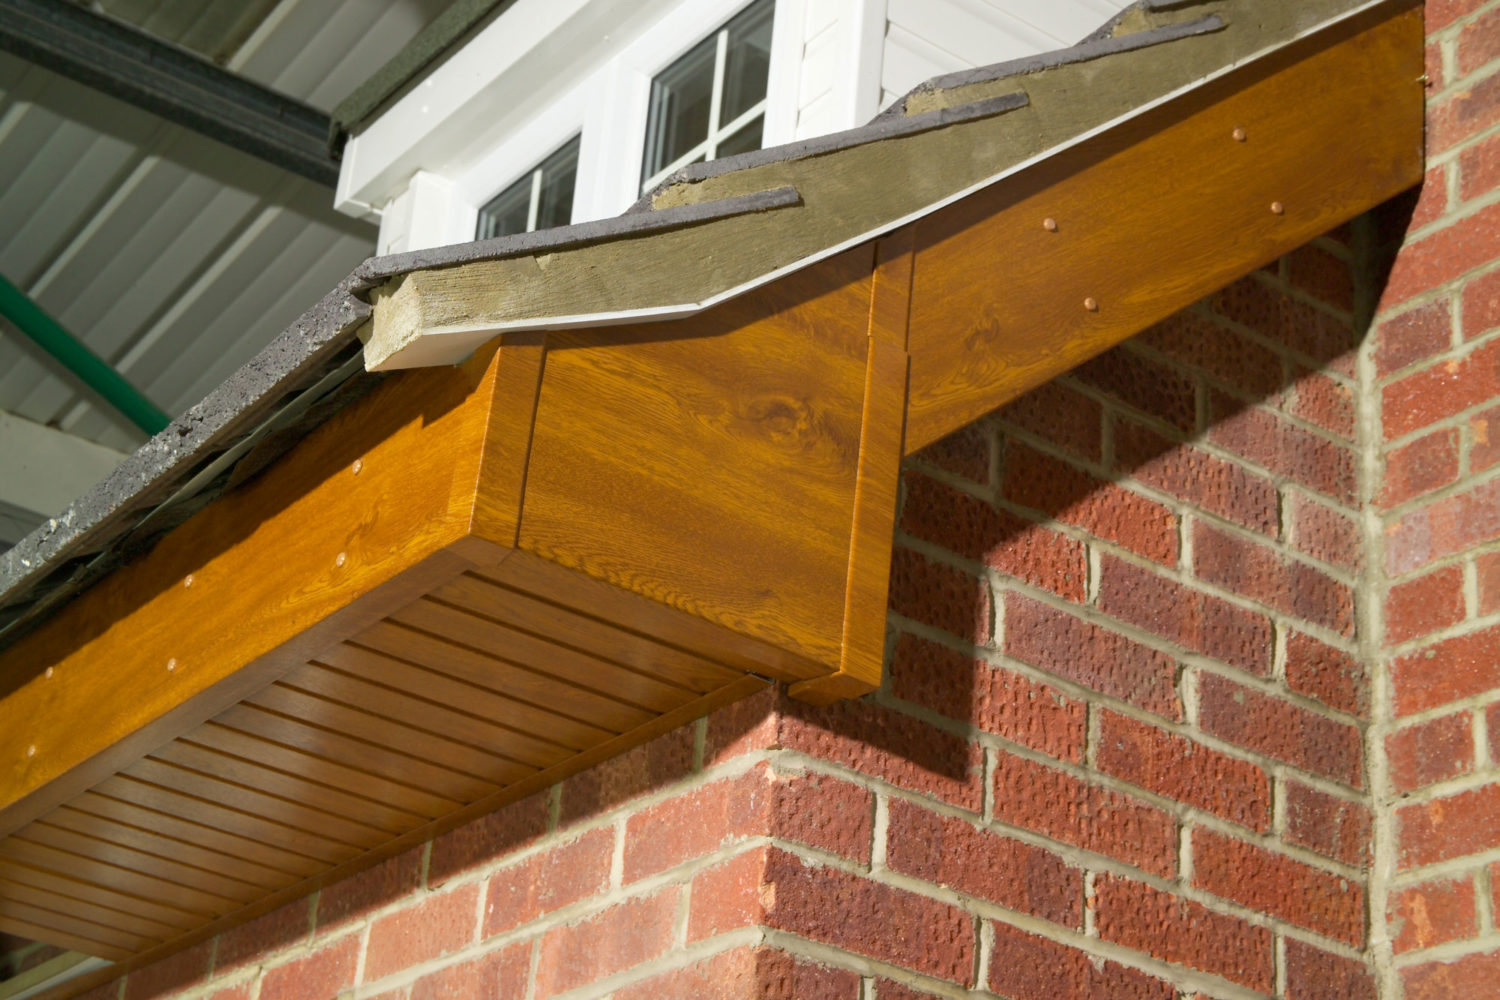 How to Care for Your Roofline?